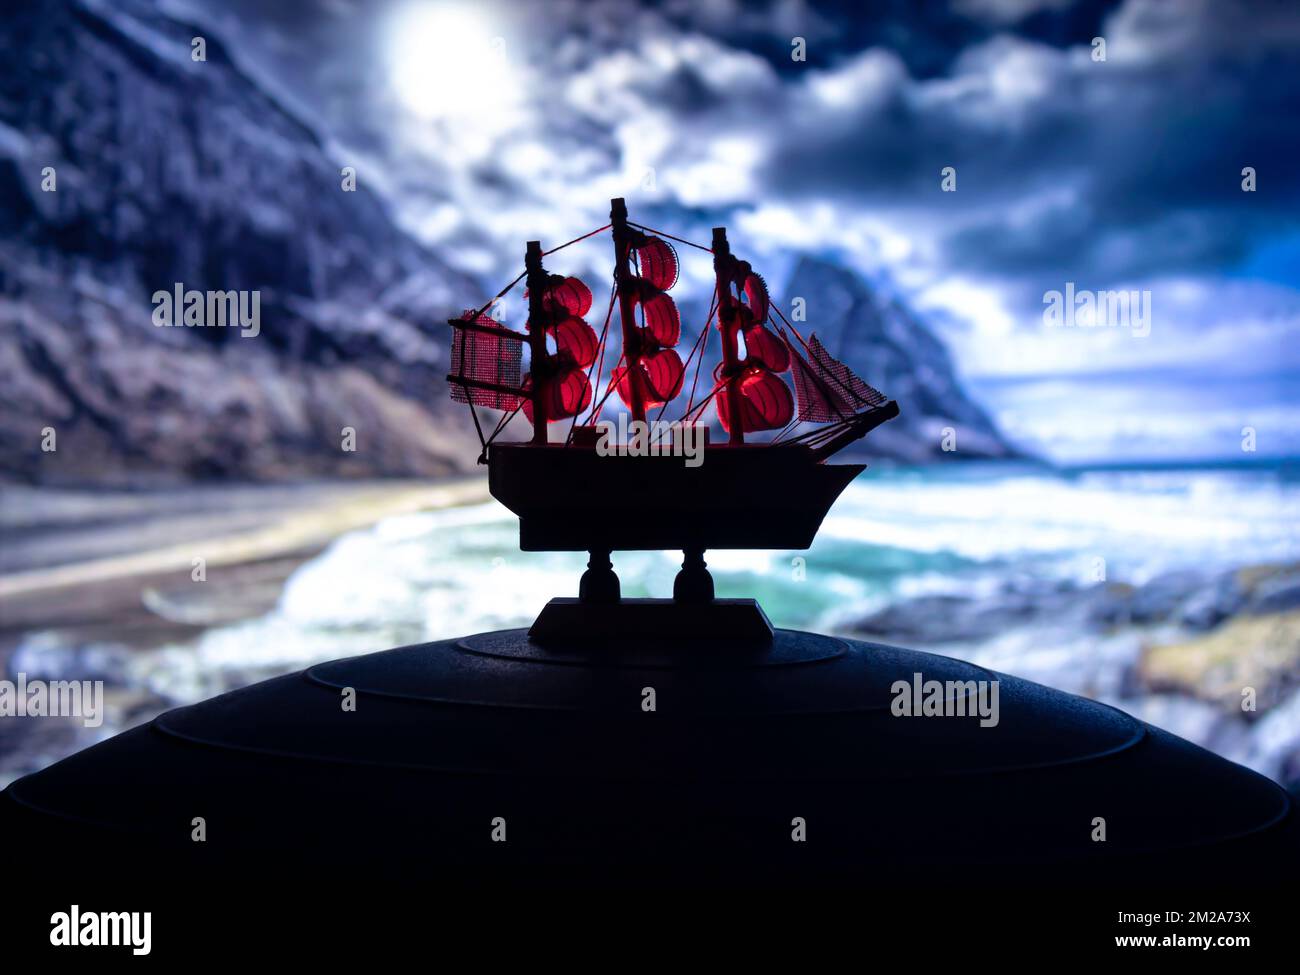 Beautiful boat toy over a blue balll with blurred night beach scene at background. Travel, adventrure, and nature concept Stock Photo